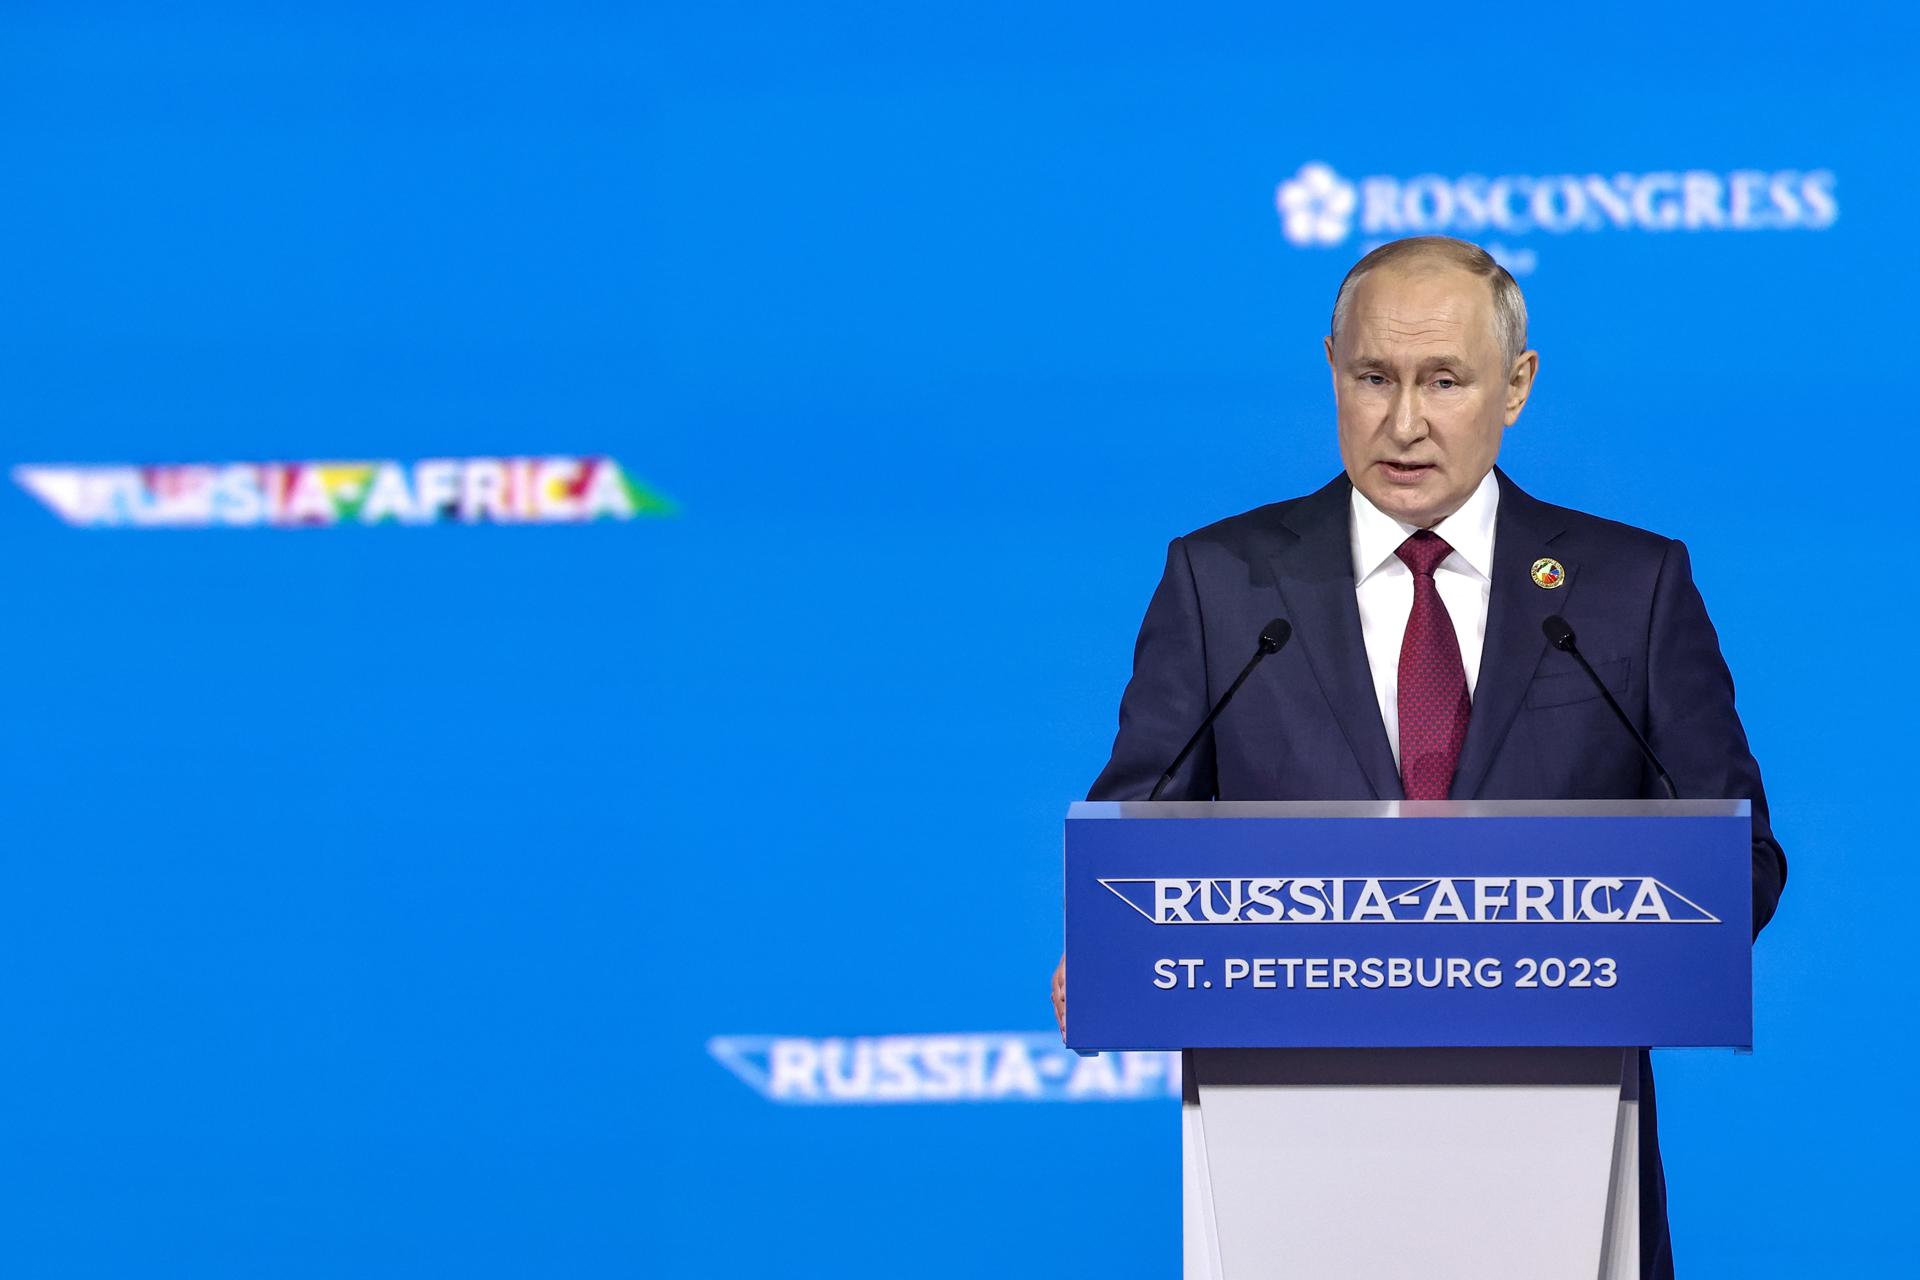 A handout photo made available by TASS Host Photo Agency shows the Russian President Vladimir Putin speaking during the plenary session of the Second Summit Economic and Humanitarian Forum 'Russia-Africa' in St.Petersburg, Russia, 27 July 2023. EFE/EPA/Valery Sharifulin / TASS Host Photo Agency / HANDOUT MANDATORY CREDIT HANDOUT EDITORIAL USE ONLY/NO SALES